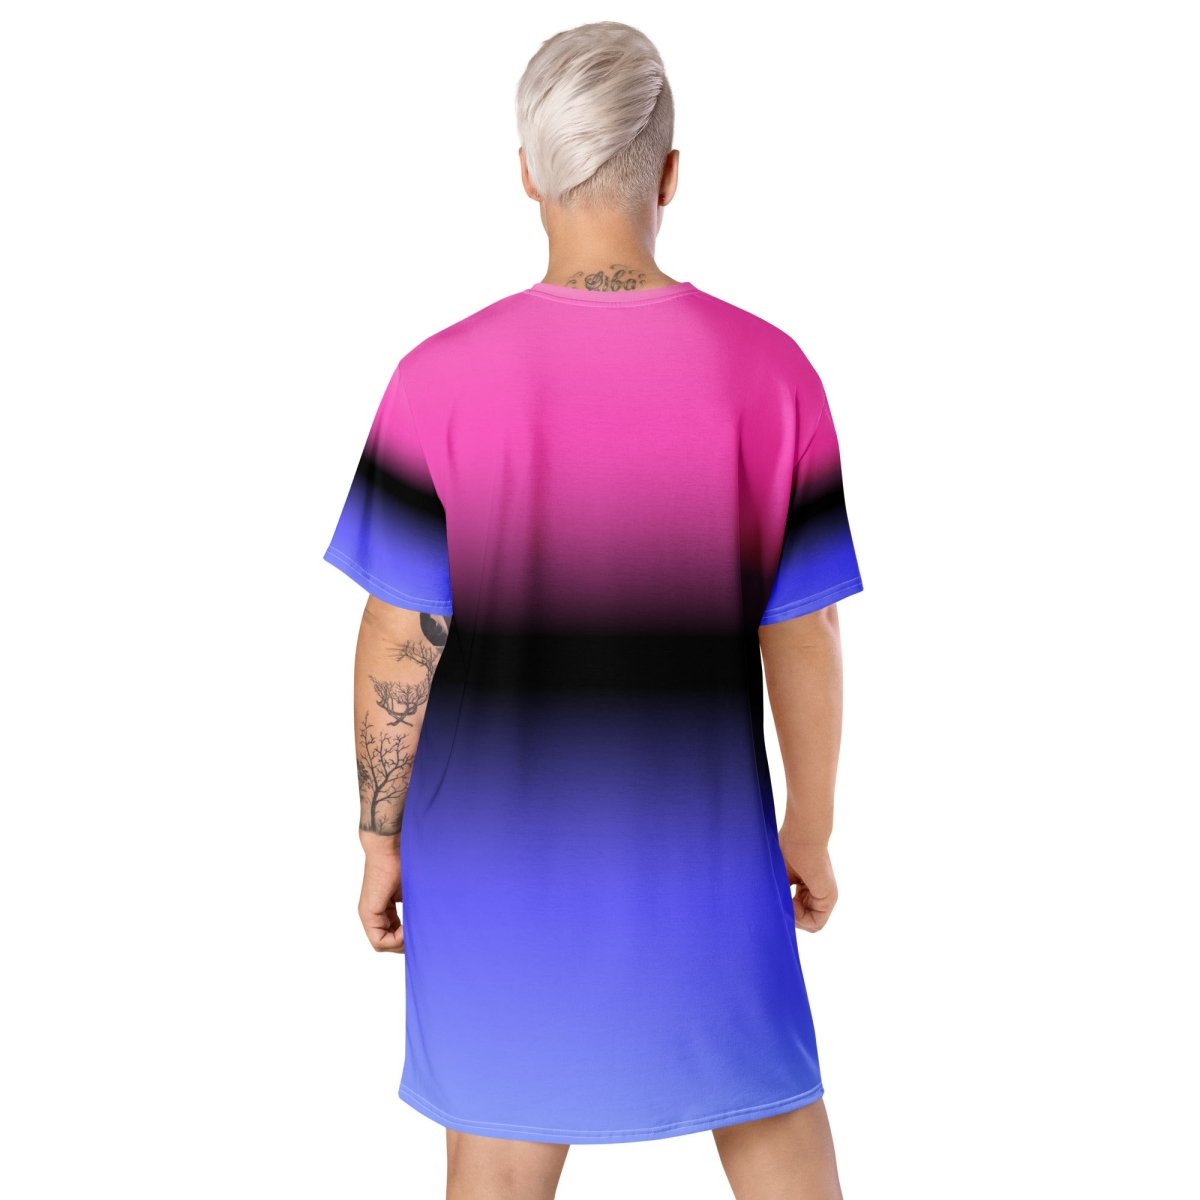 Ombré Omnisexual Flag Dress - On Trend Shirts